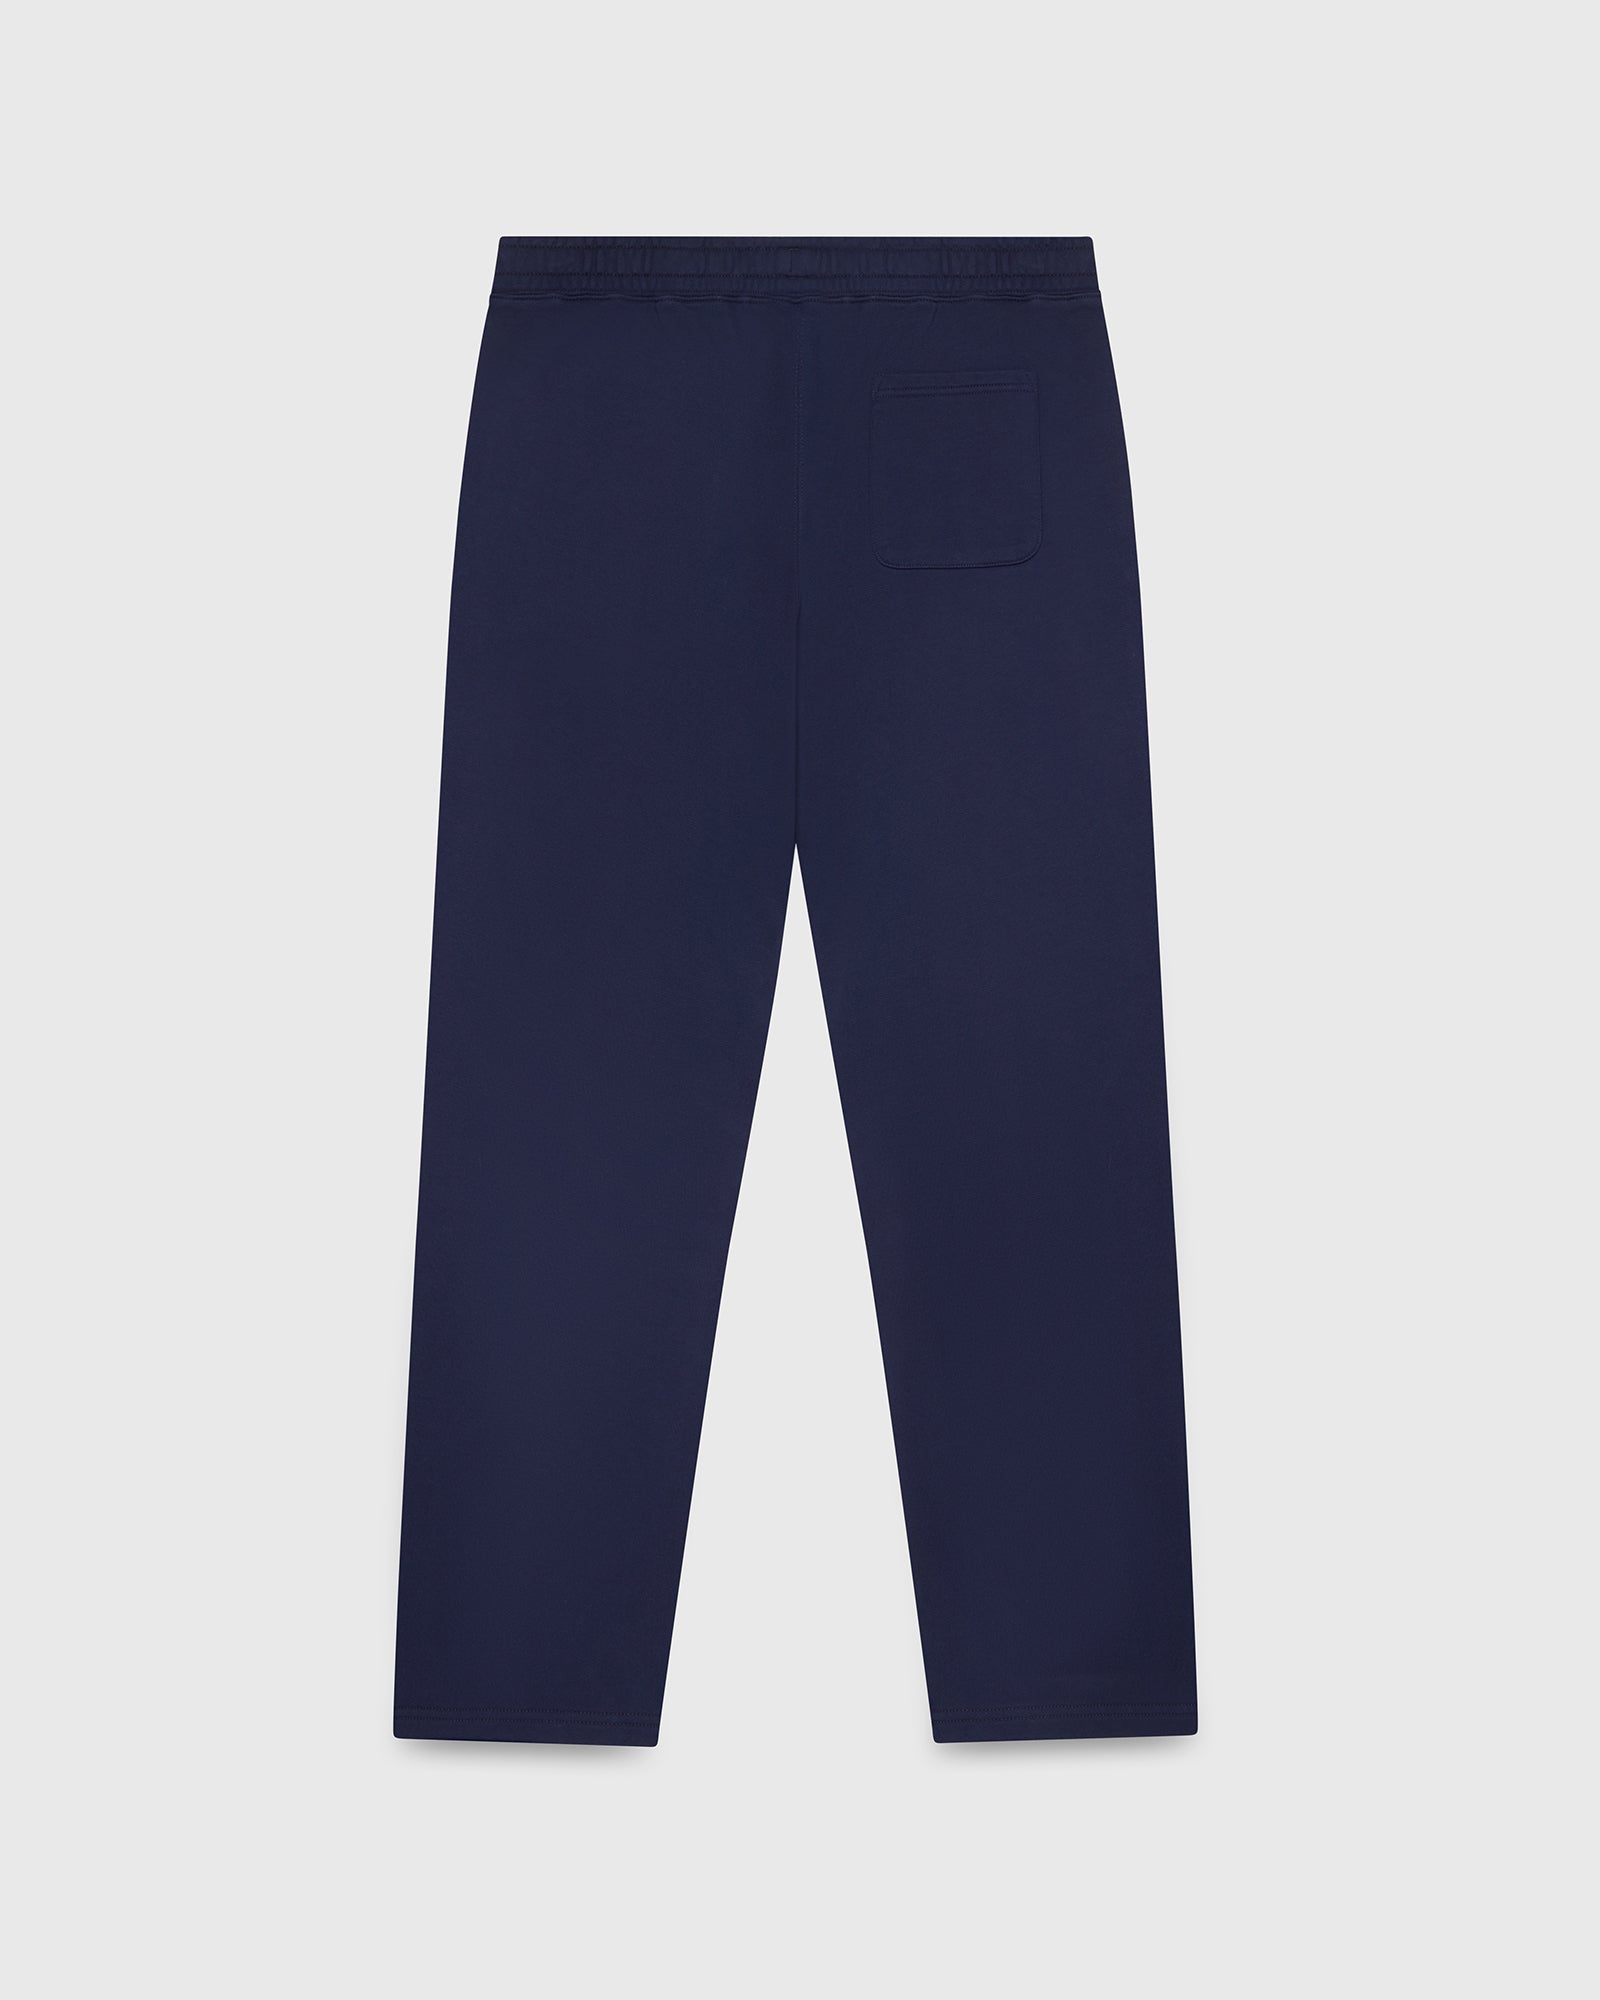 French Terry Open Hem Sweatpant - Navy